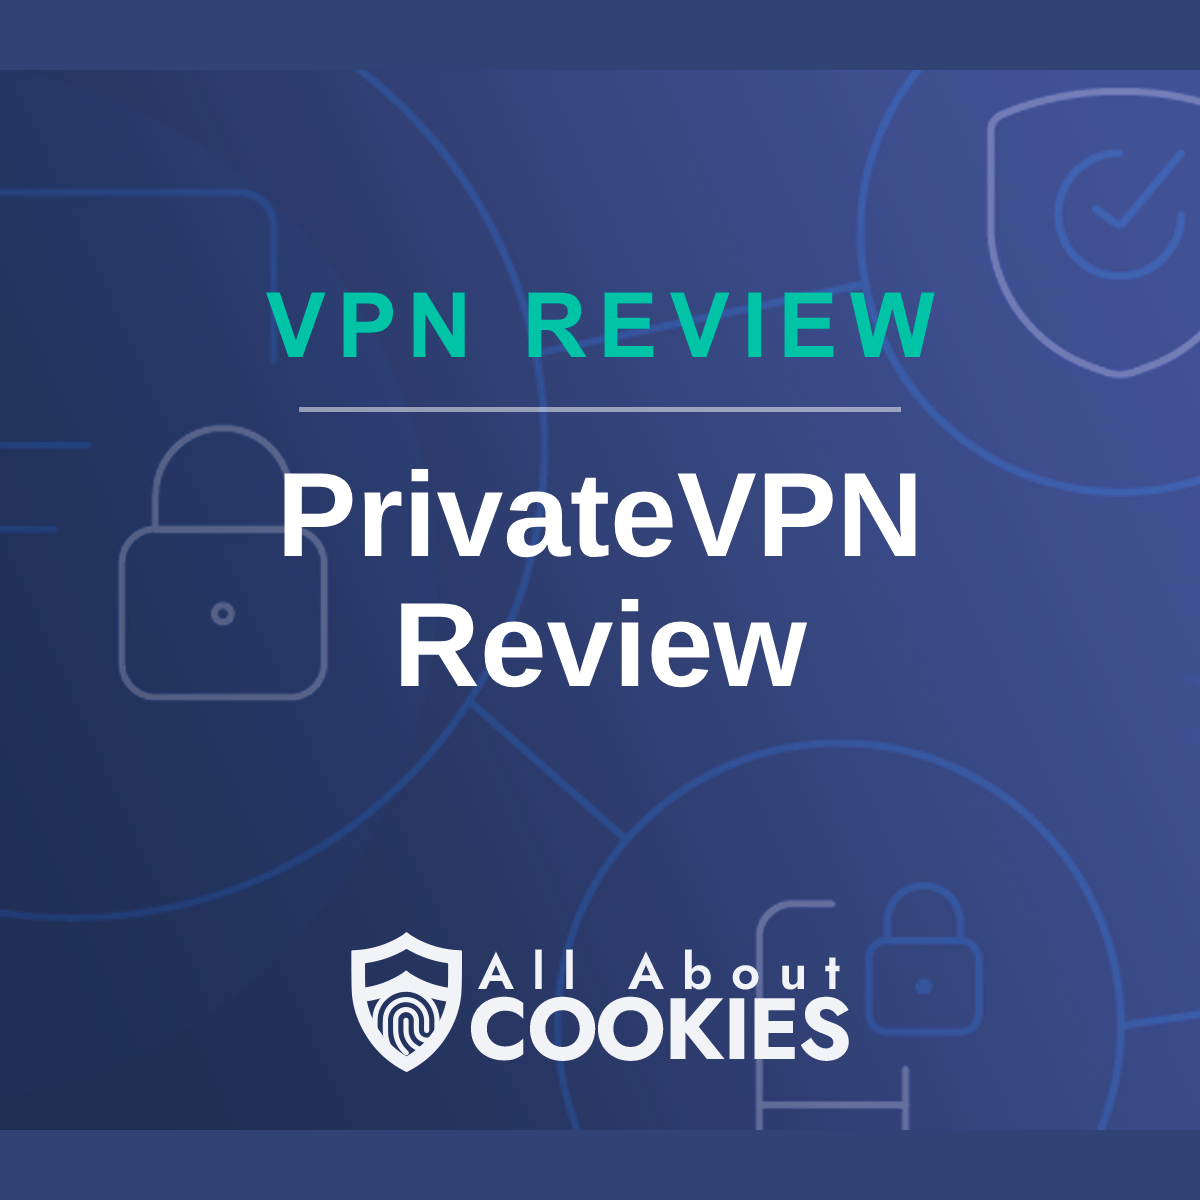 A blue background with images of locks and shields with the text &quot;PrivateVPN Review&quot; and the All About Cookies logo. 